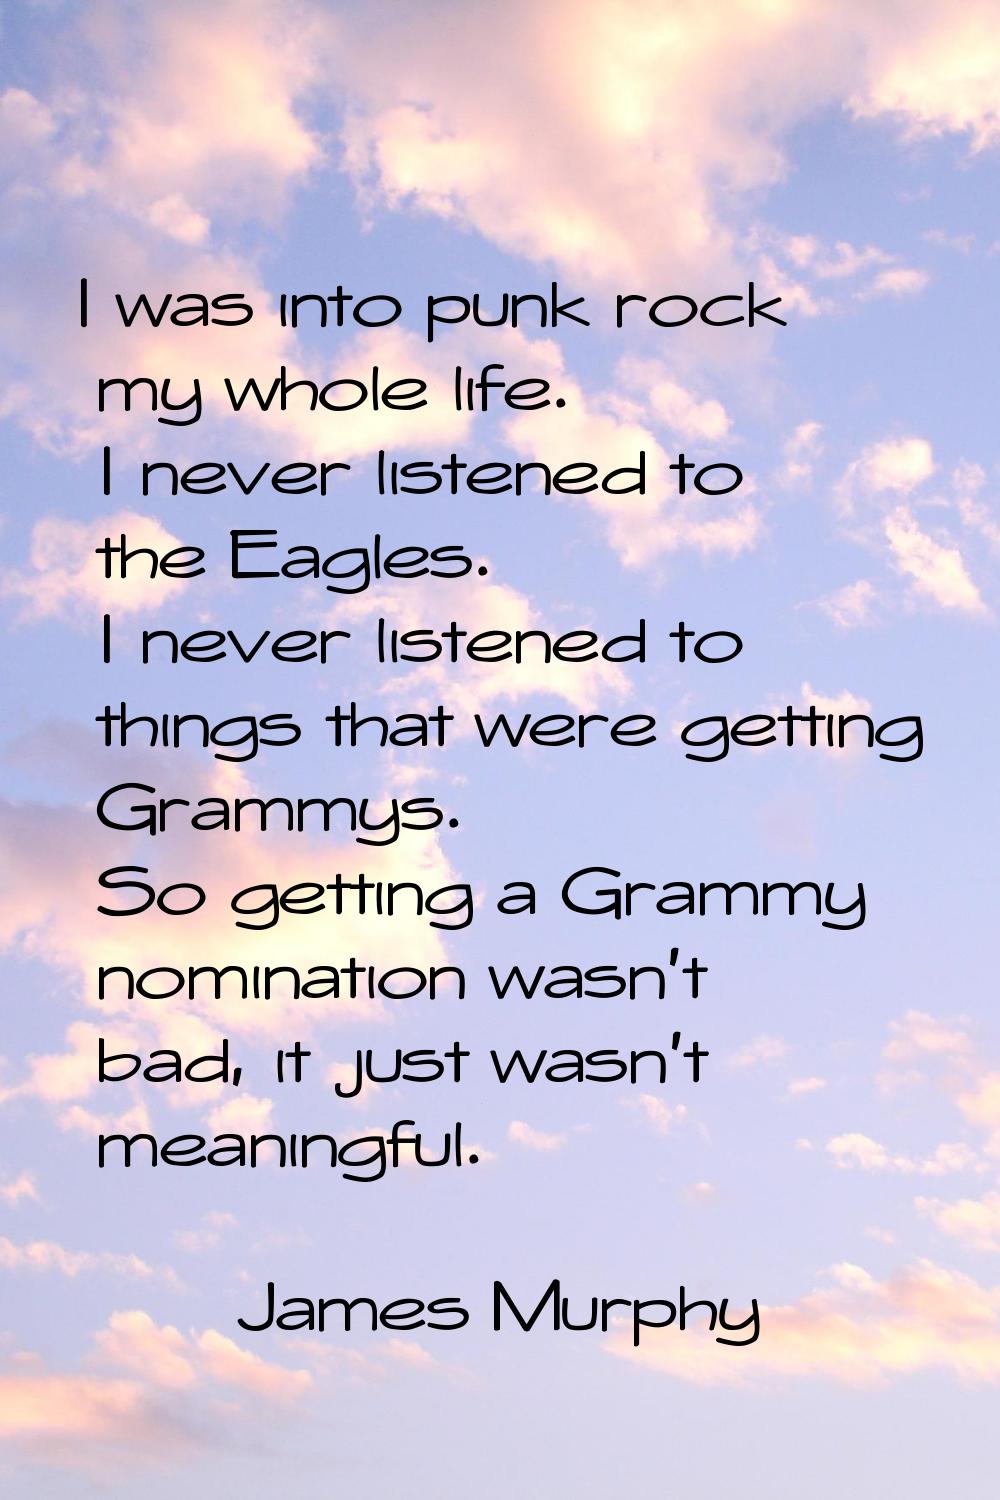 I was into punk rock my whole life. I never listened to the Eagles. I never listened to things that